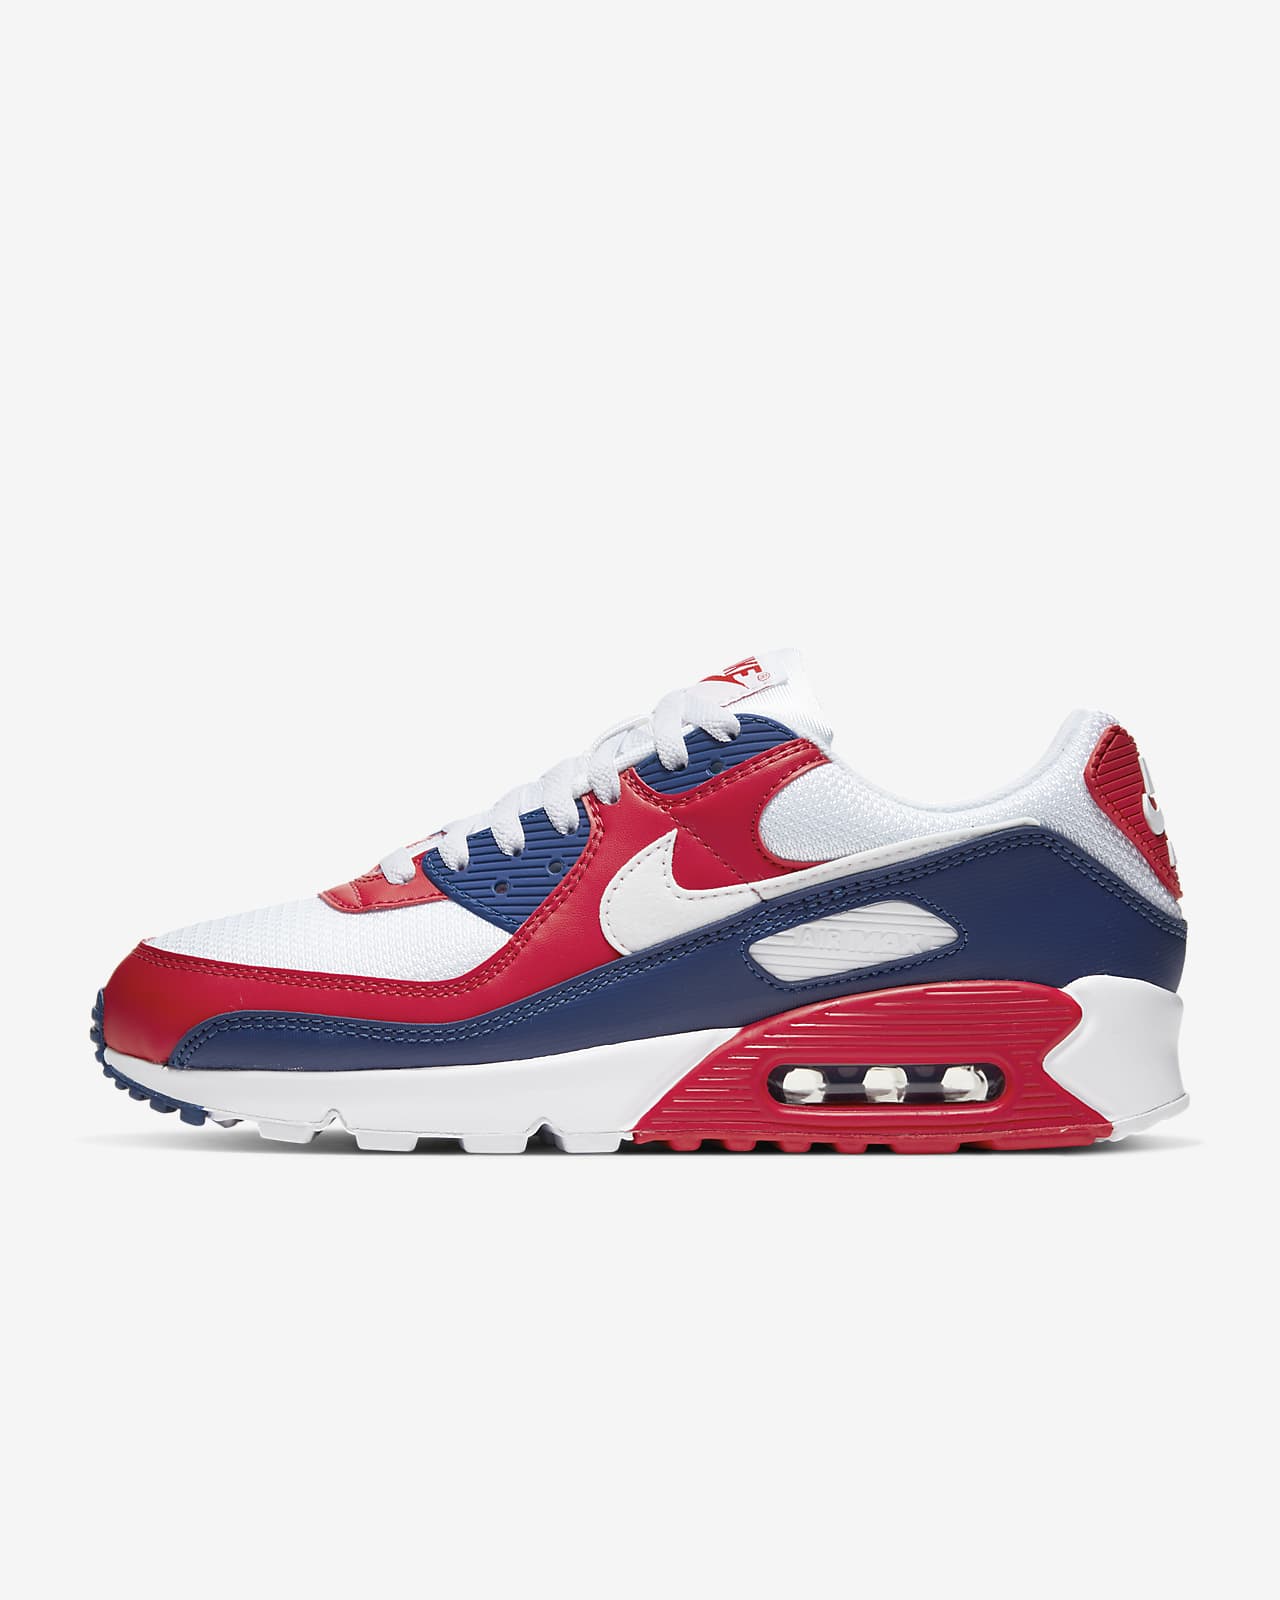 red white blue sneakers nike